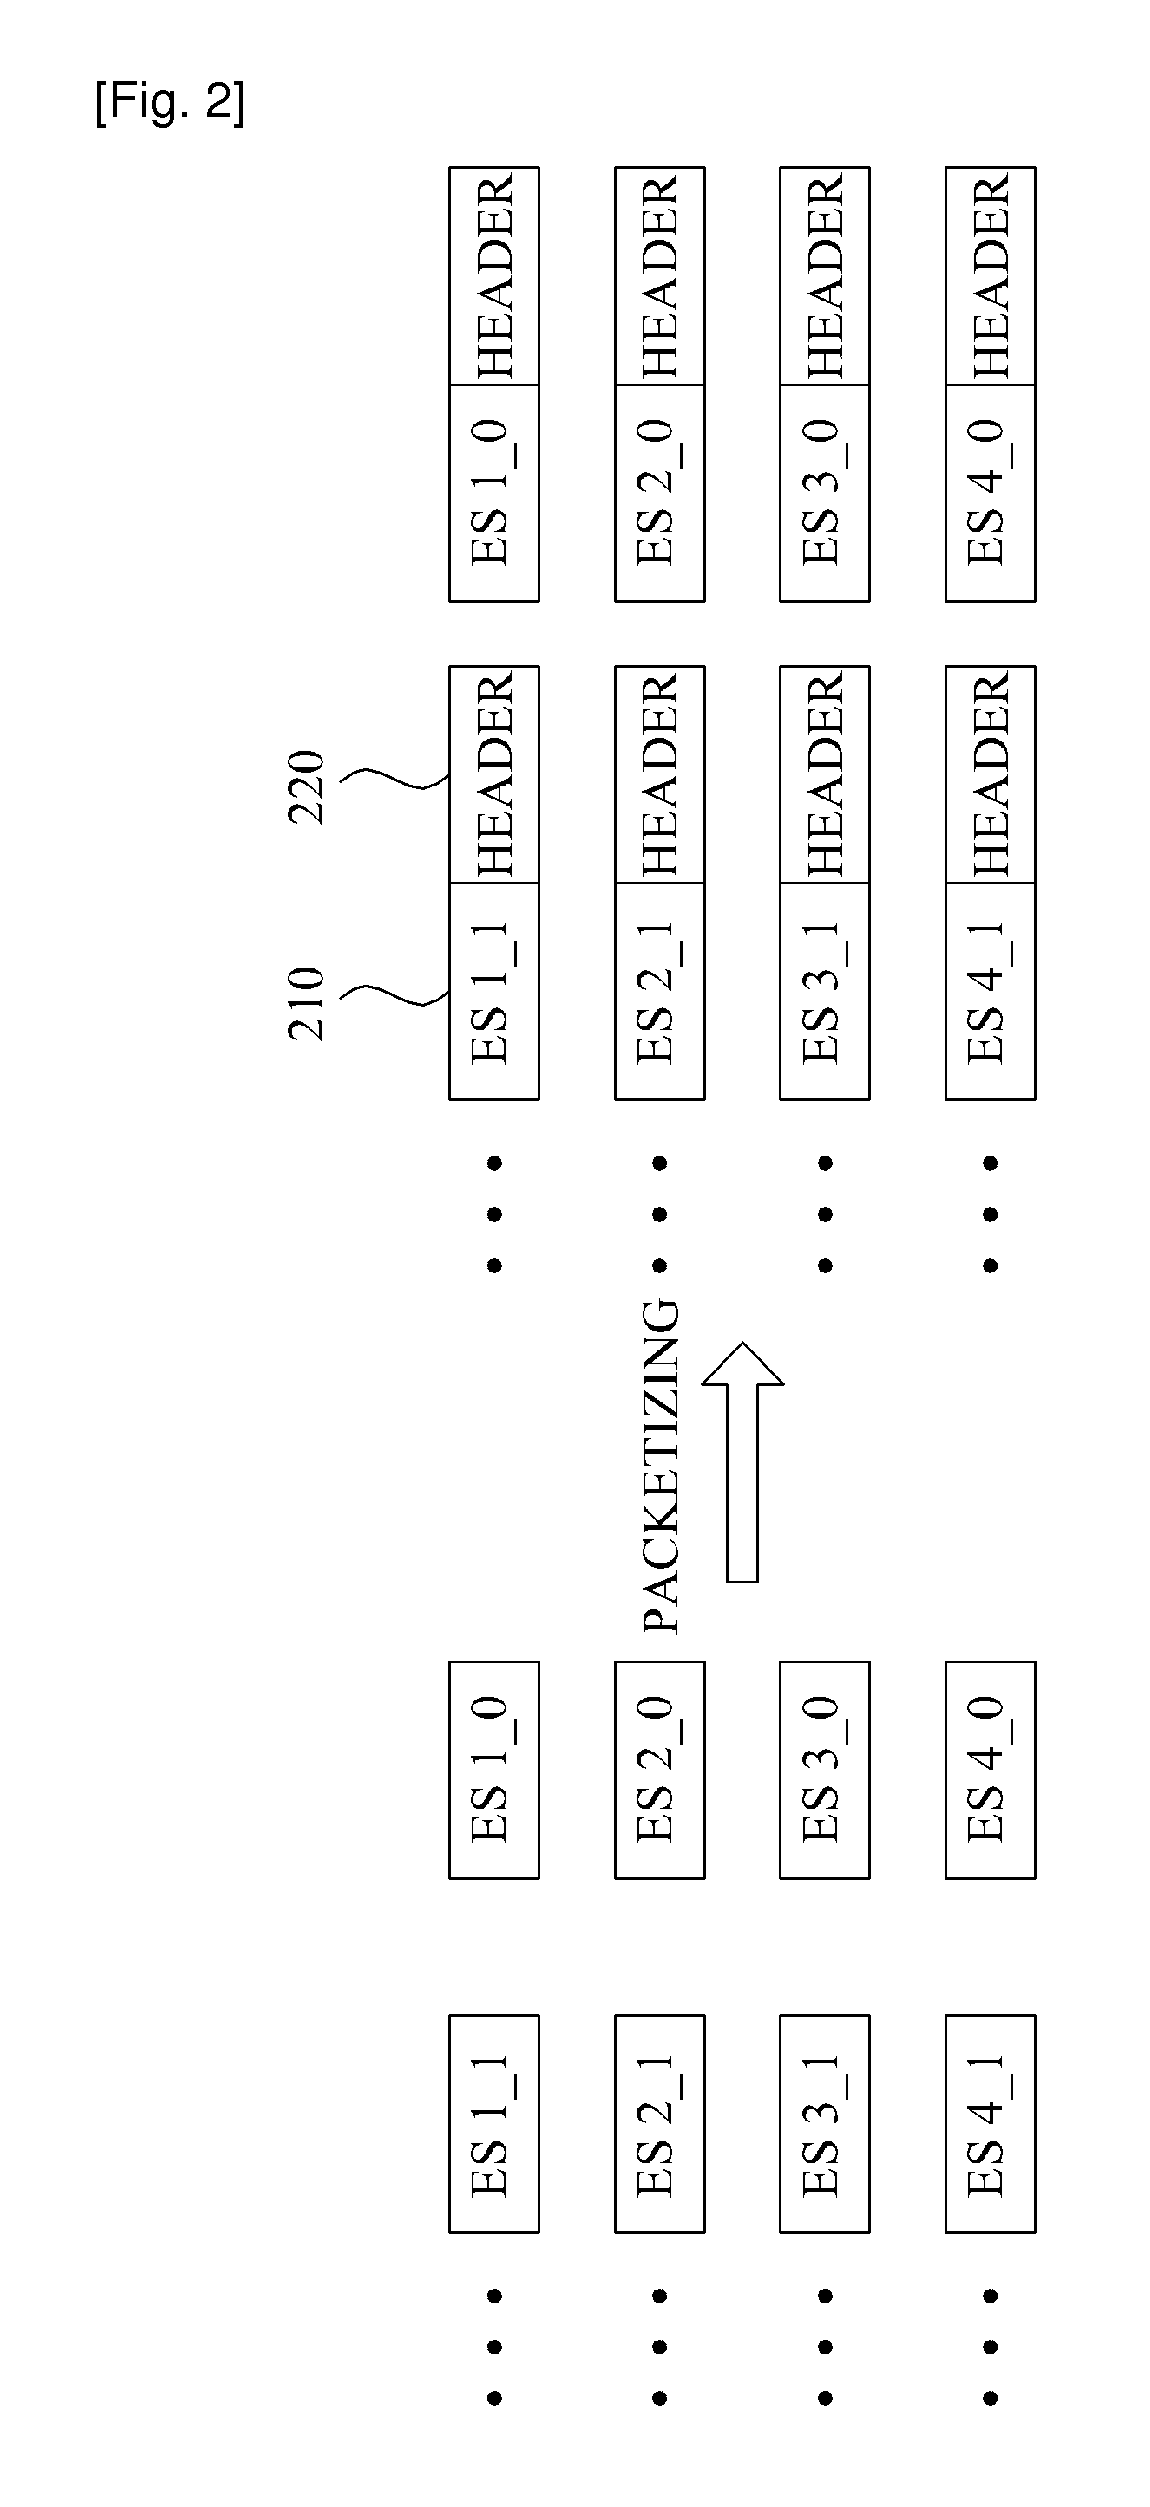 Method and apparatus for transmitting and receiving of the object-based audio contents